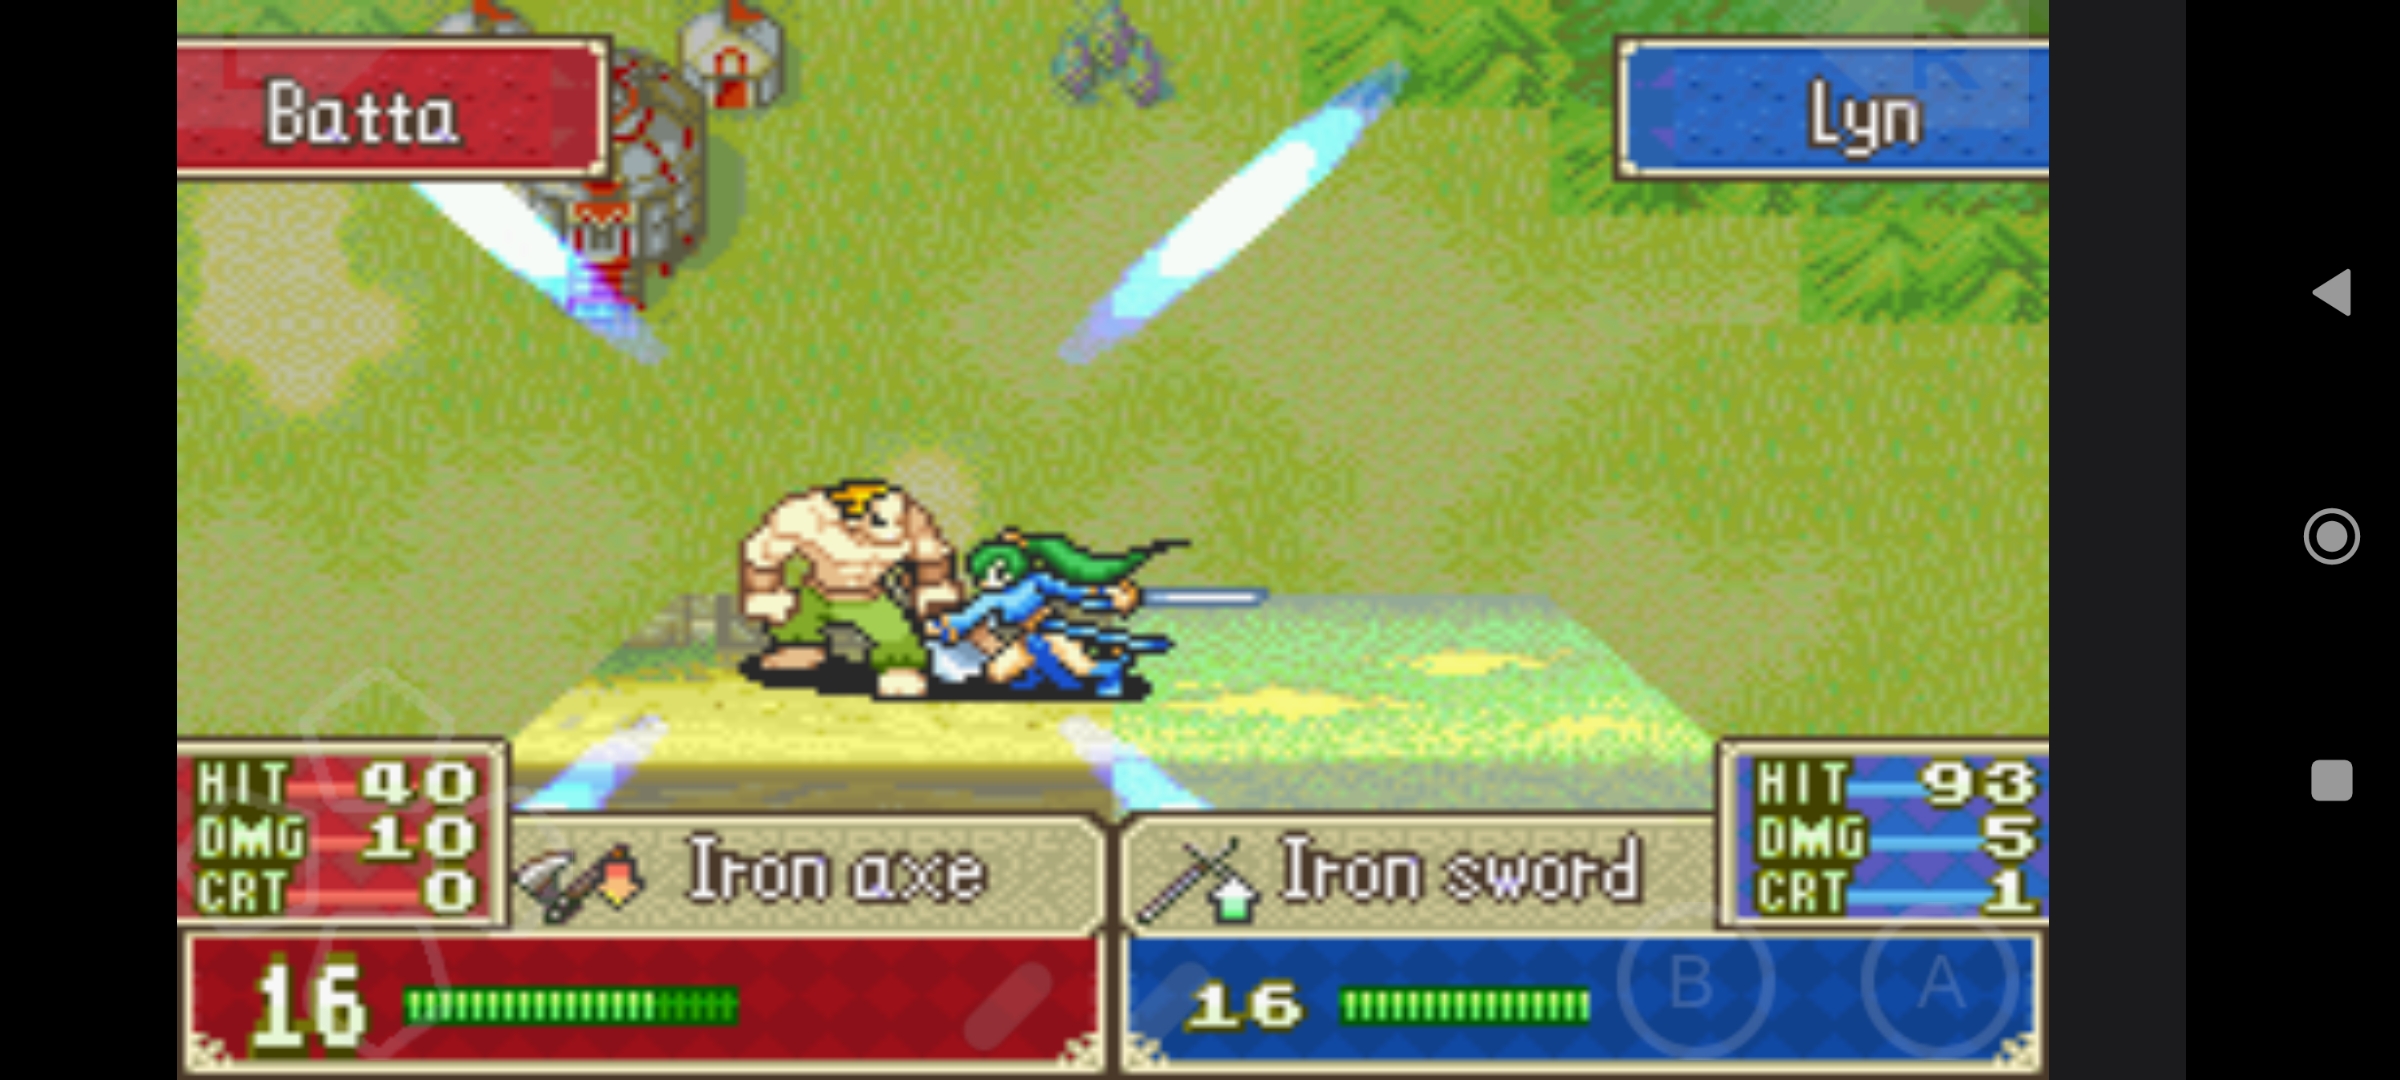 [Game Android] Fire Emblem